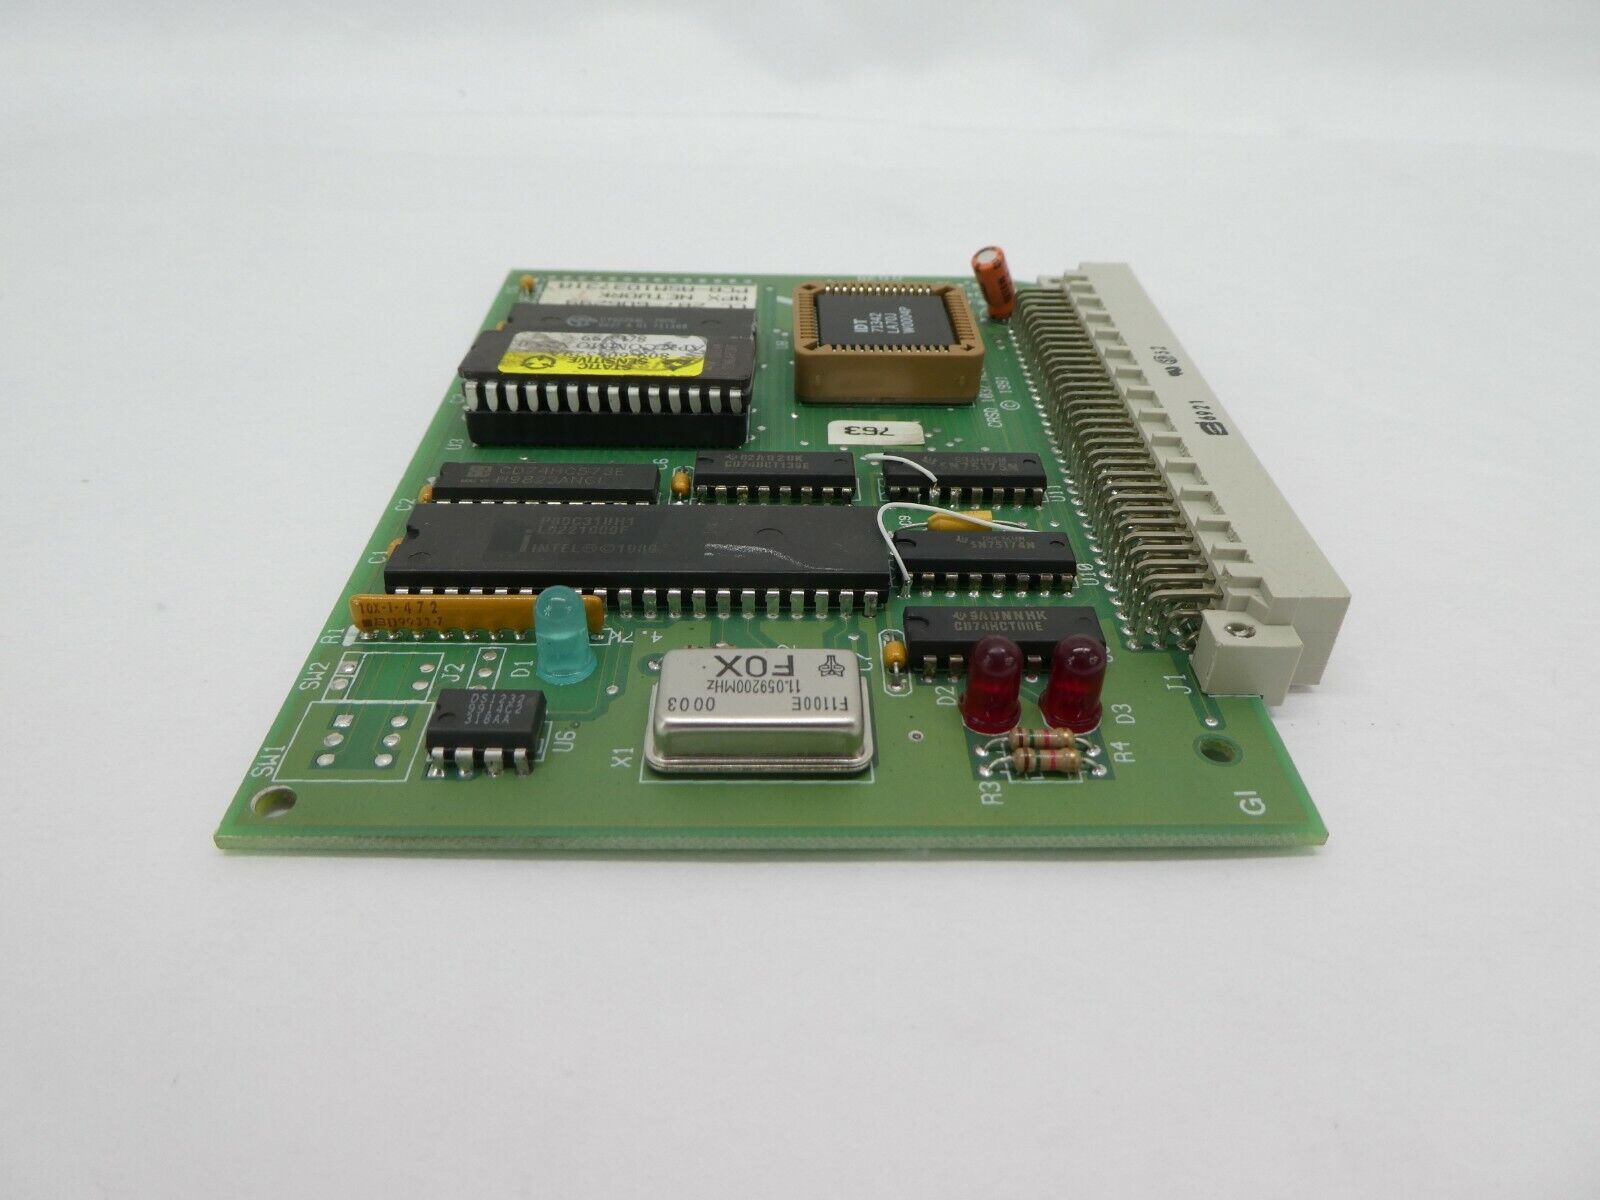 Air Products CRSD 1037 APX Network PCB Card CC 287-606299 ASM103731A Working